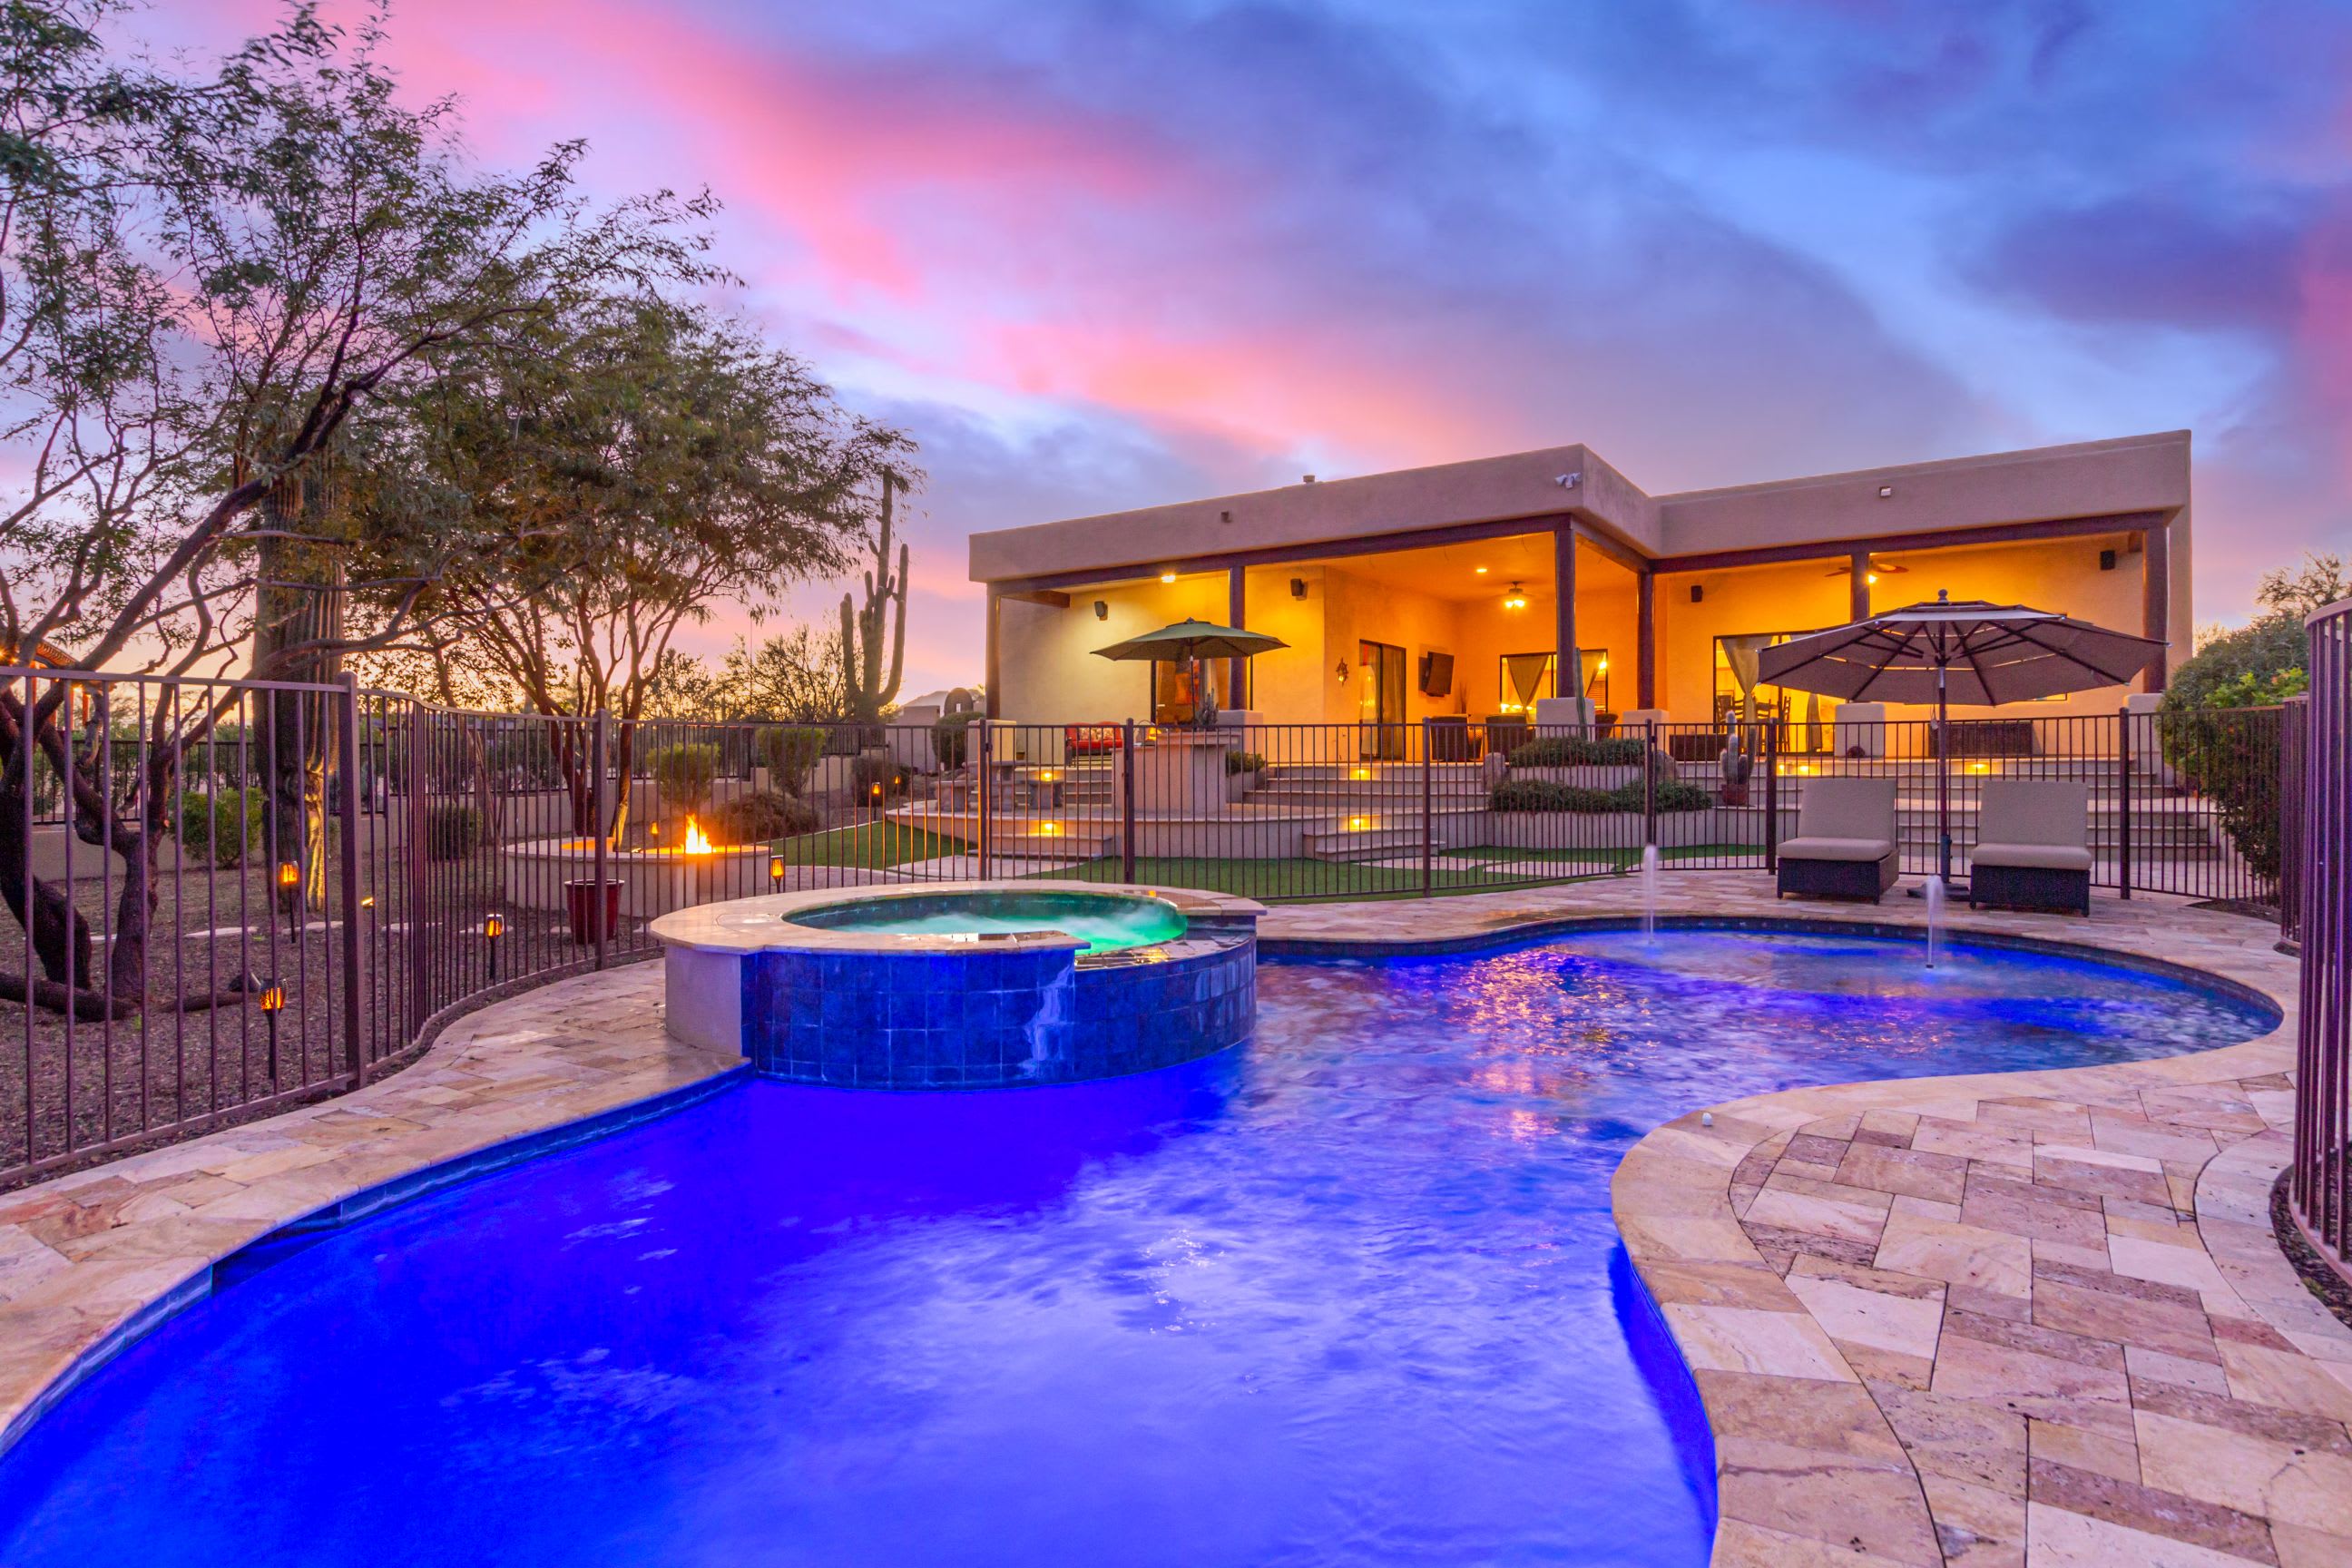 Rustic Desert Oasis w/Pool+Sps+Firepit+BBall+Bocce